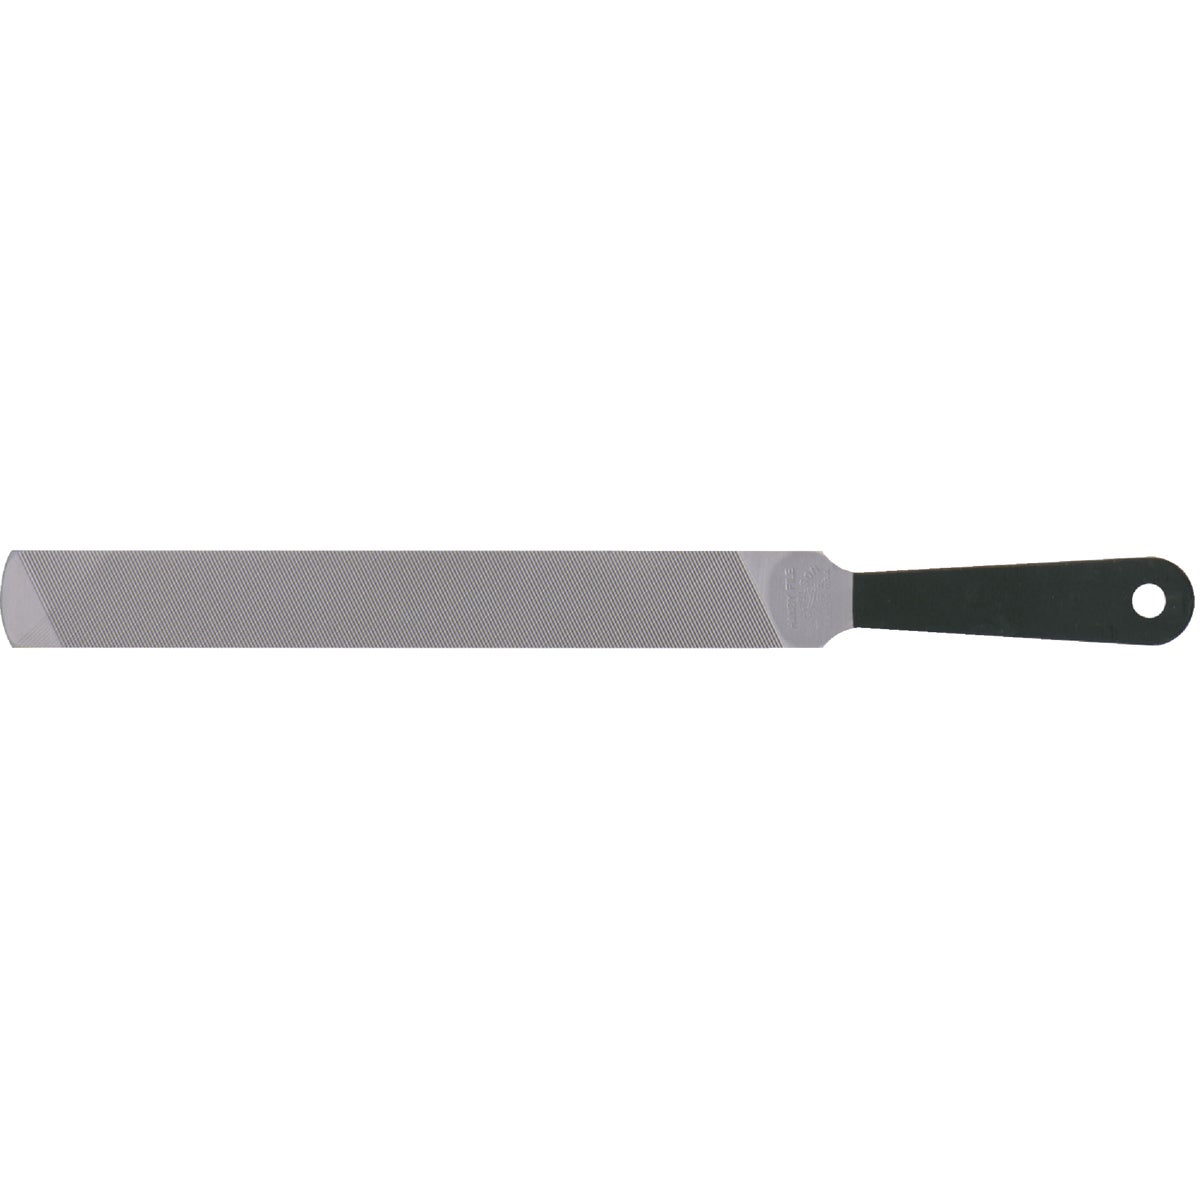 Item 316016, Single-cut on one side for sharpening edge tools and smoothing surfaces.